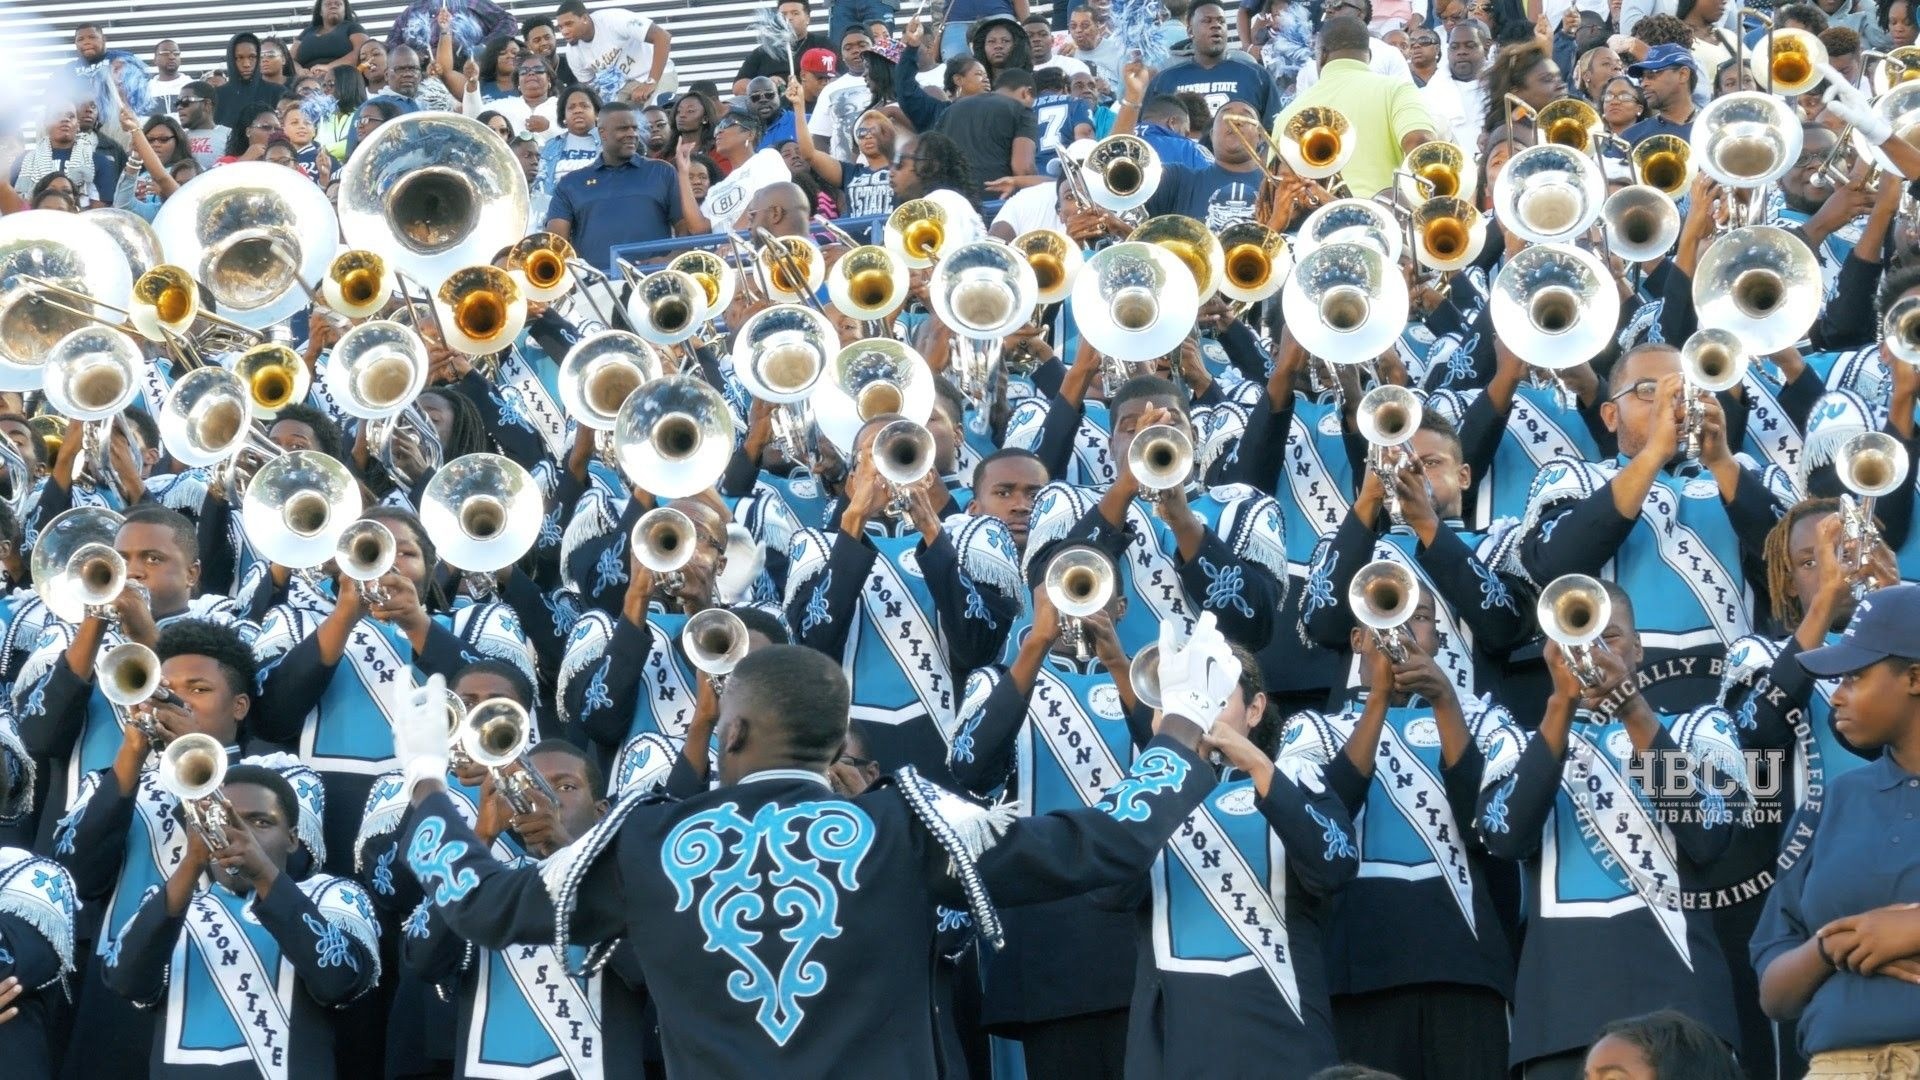 Marching Band: Jackson State University, Musicians play while walking together at a sports event, HBCU. 1920x1080 Full HD Wallpaper.